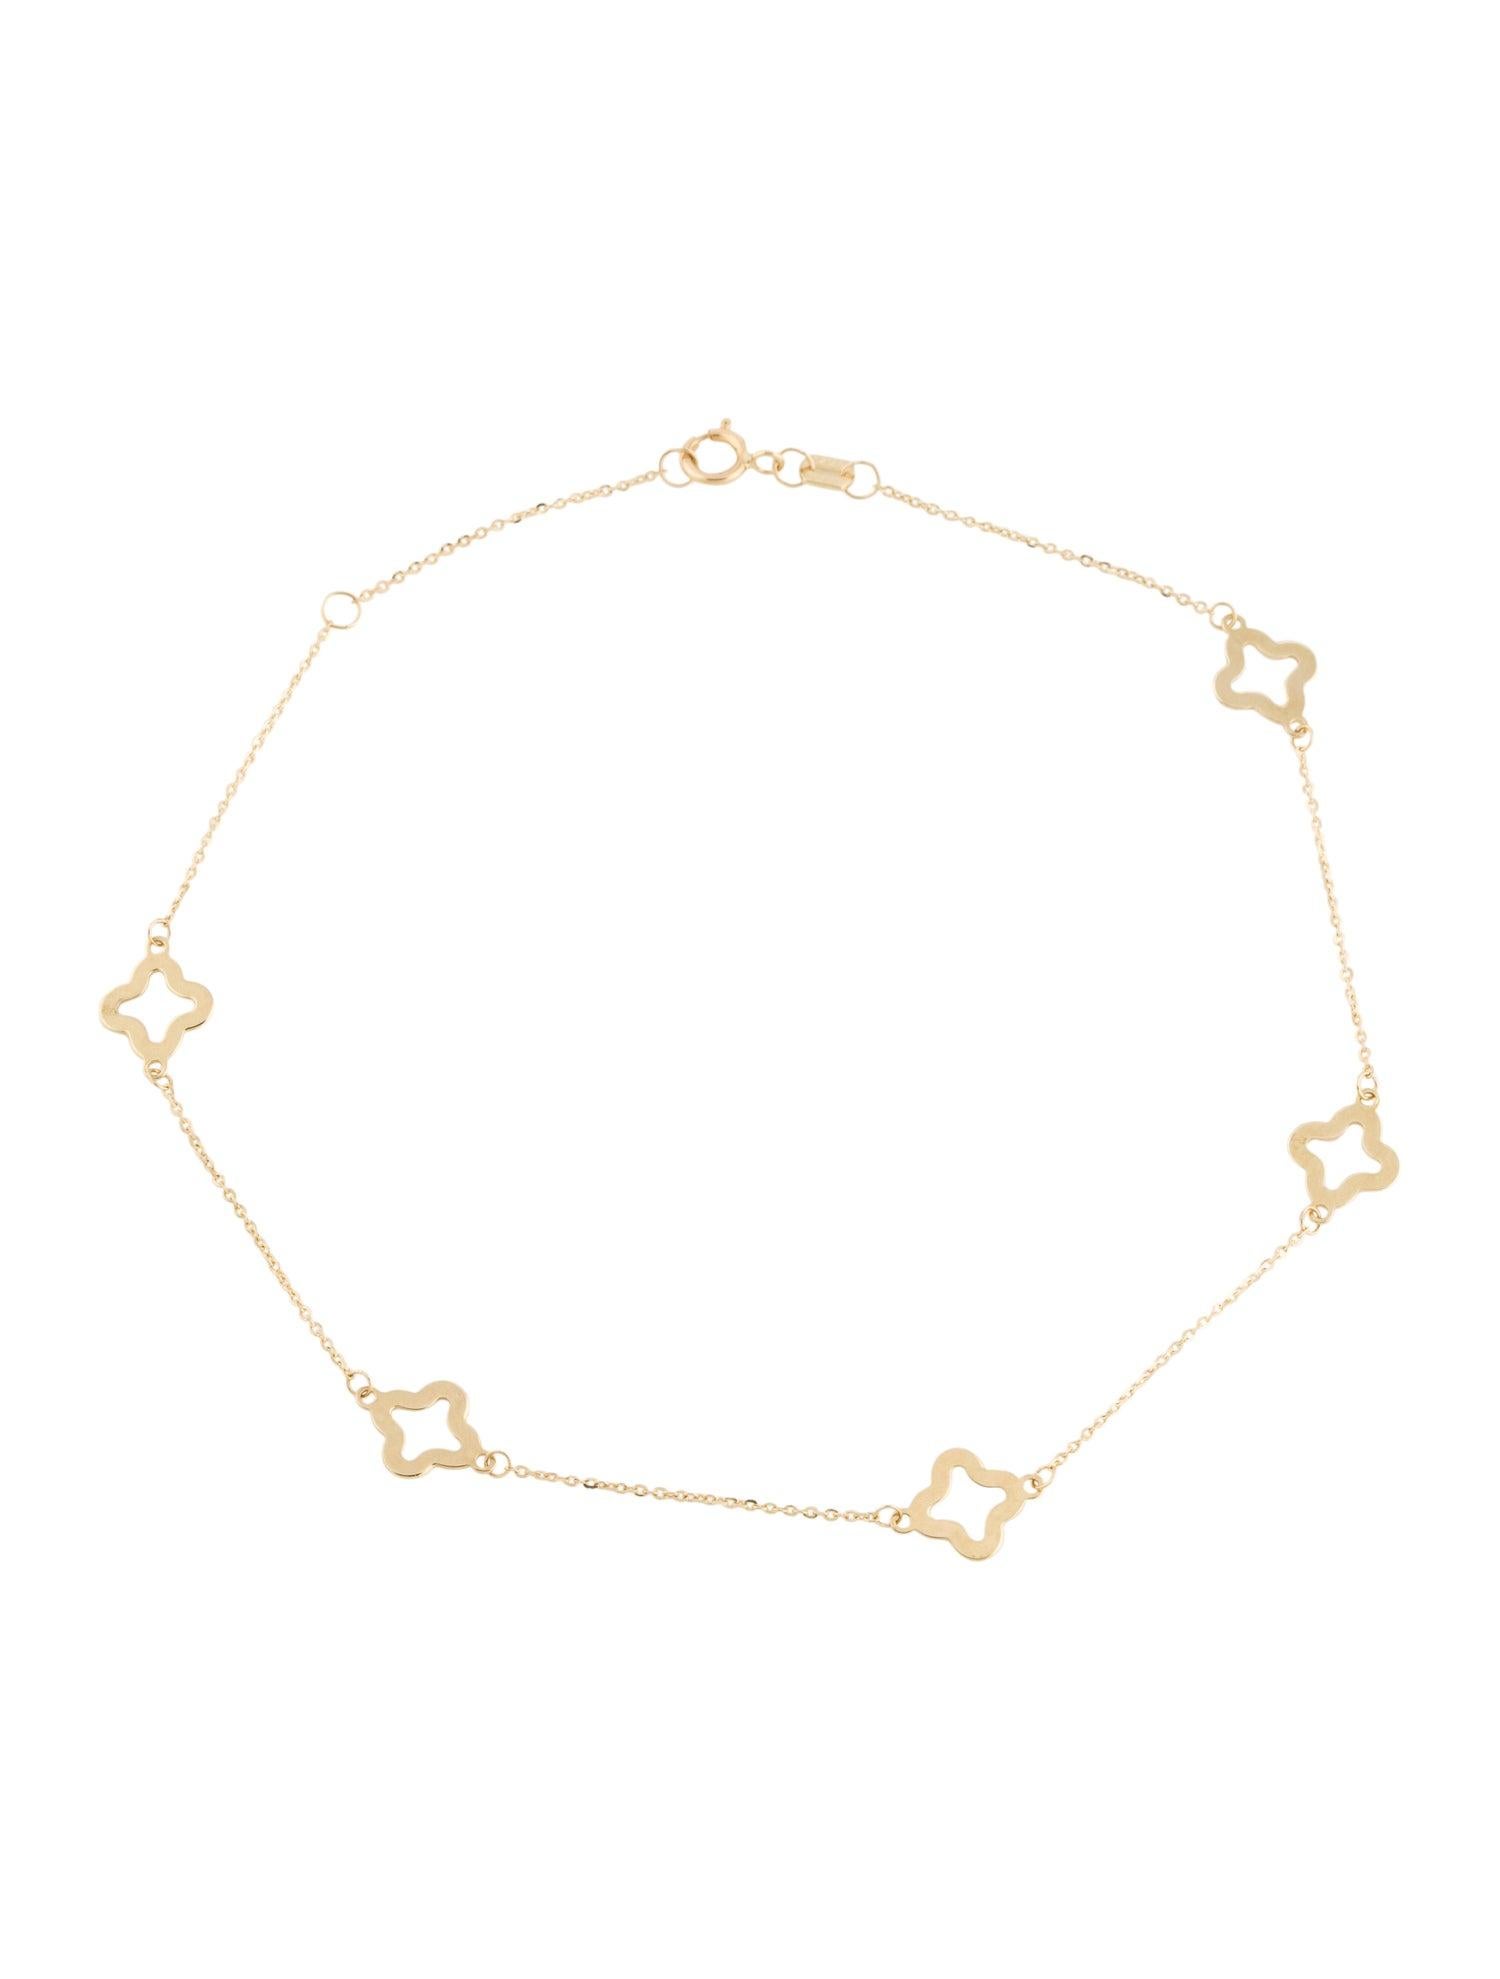 Station Clover Bar Anklet: This Simple & Beautiful station clover Chain anklet is measured 9-10